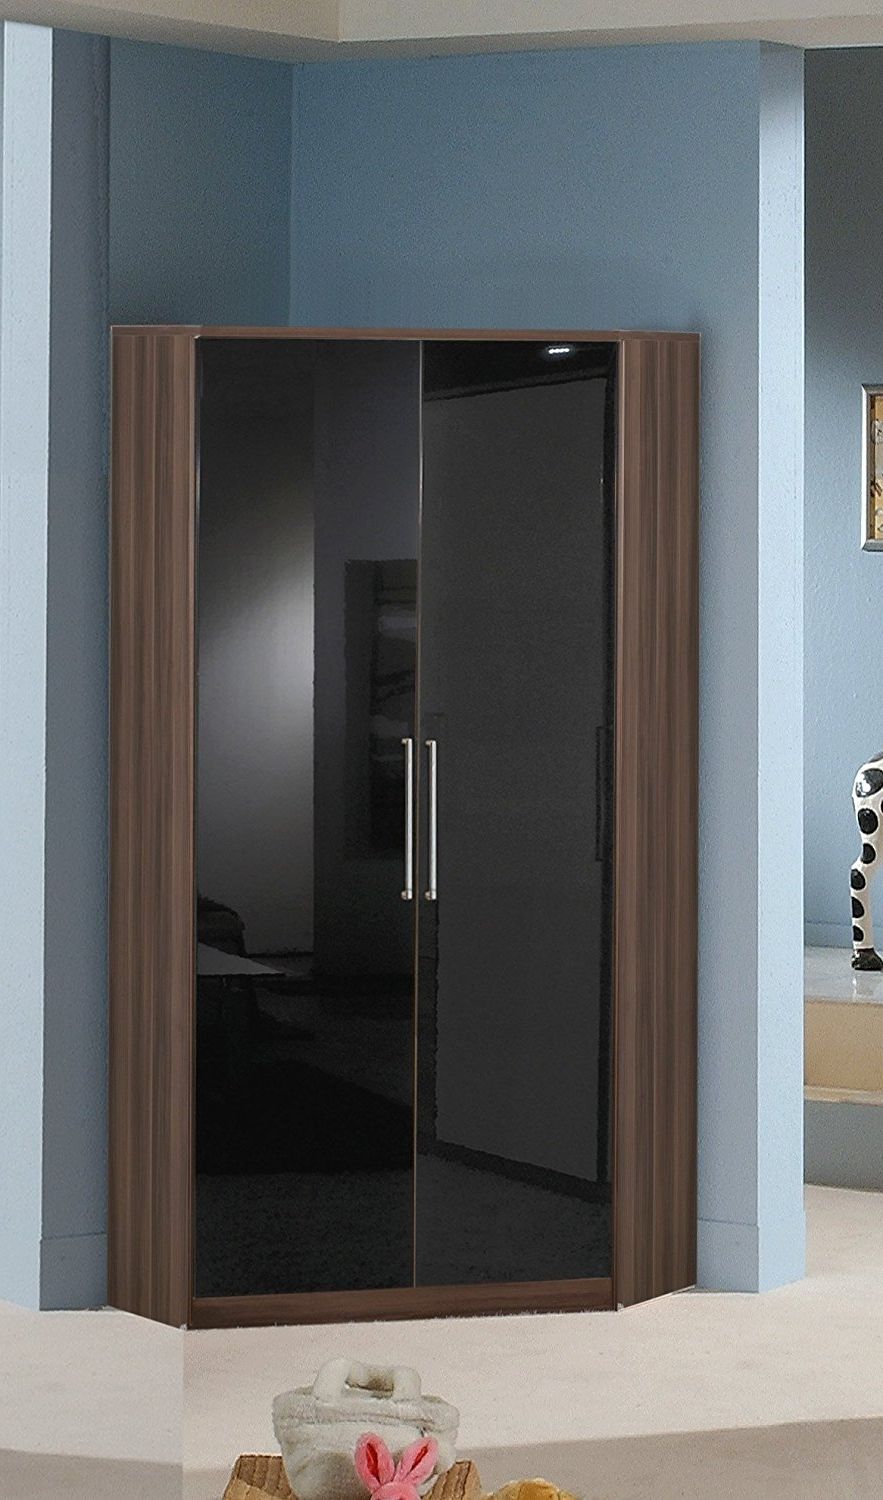 Black Shiny Wardrobes For Well Known Dresden 2 Door Corner Wardrobe Black Gloss And Walnut  (View 6 of 15)